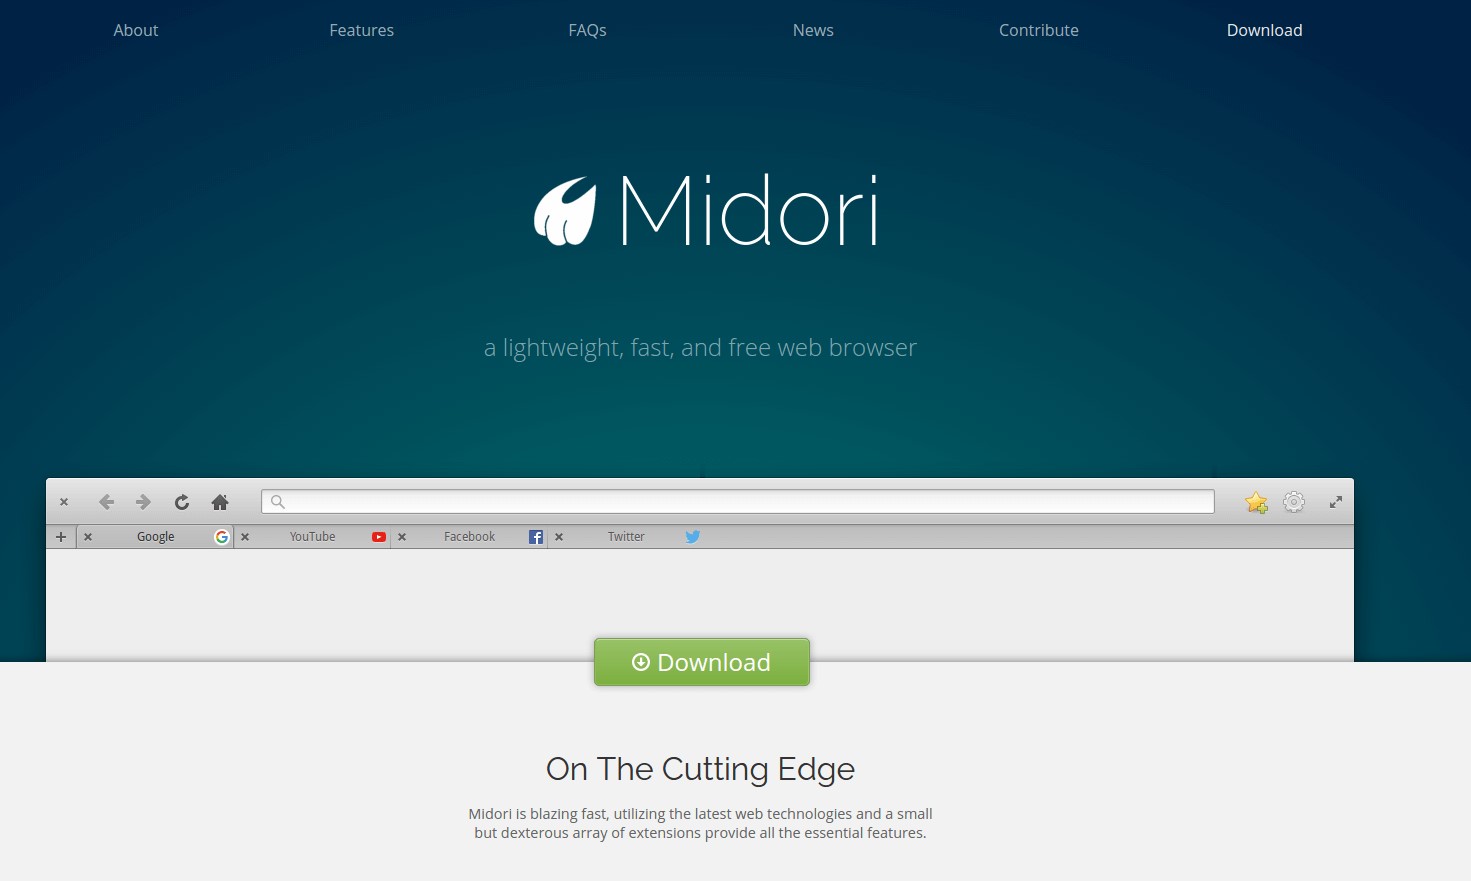 What Is The Midori Web Browser?